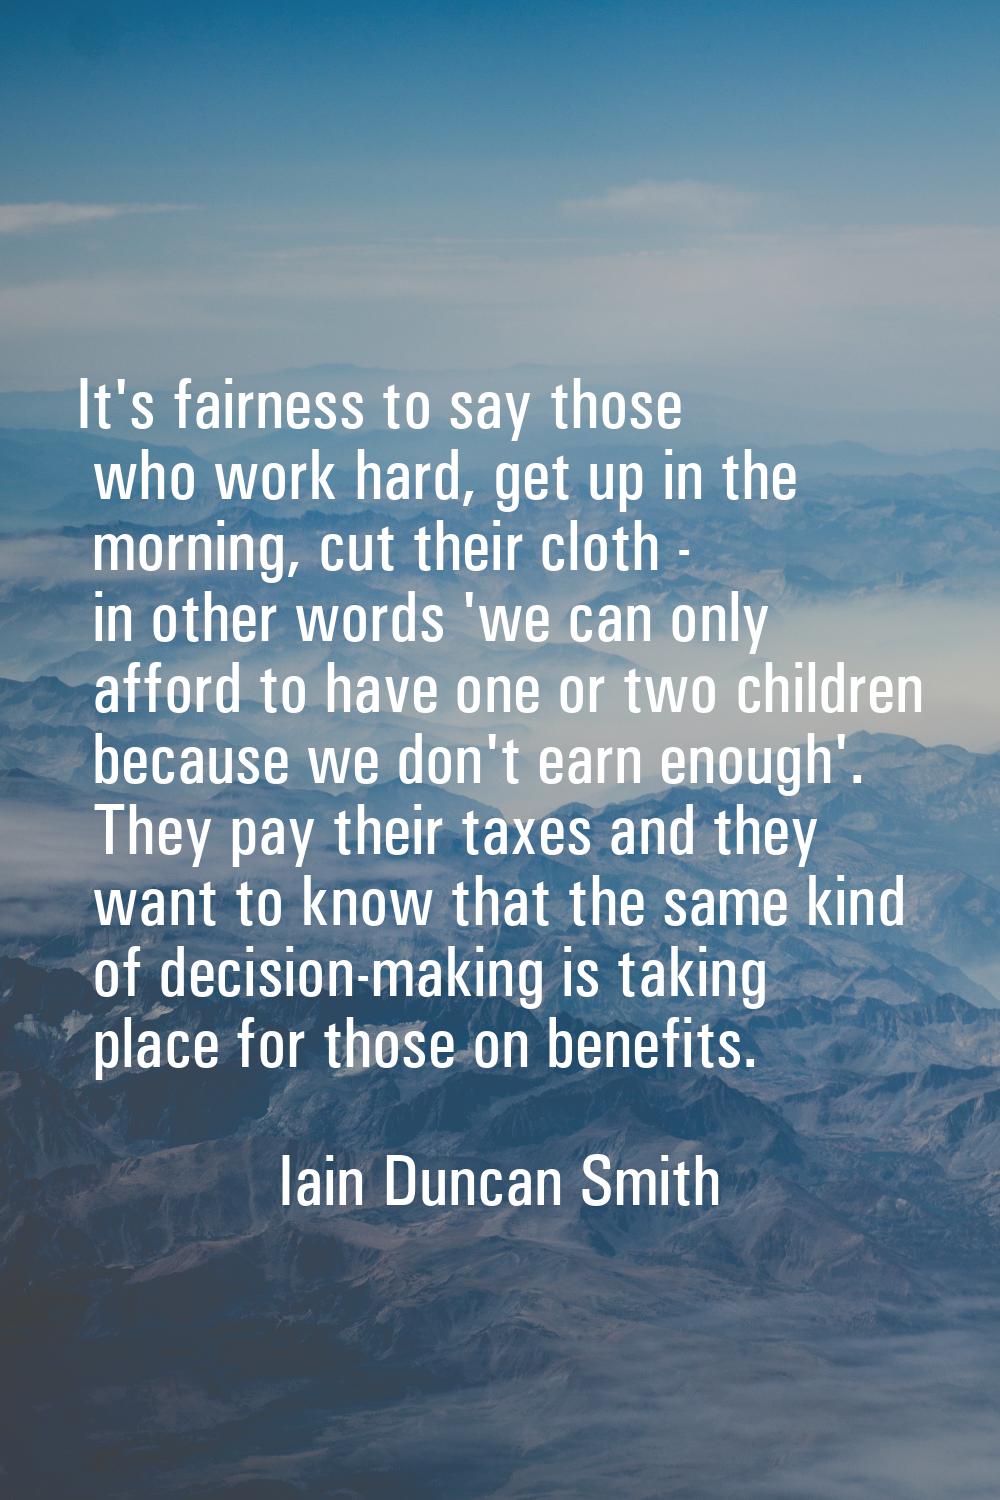 It's fairness to say those who work hard, get up in the morning, cut their cloth - in other words '